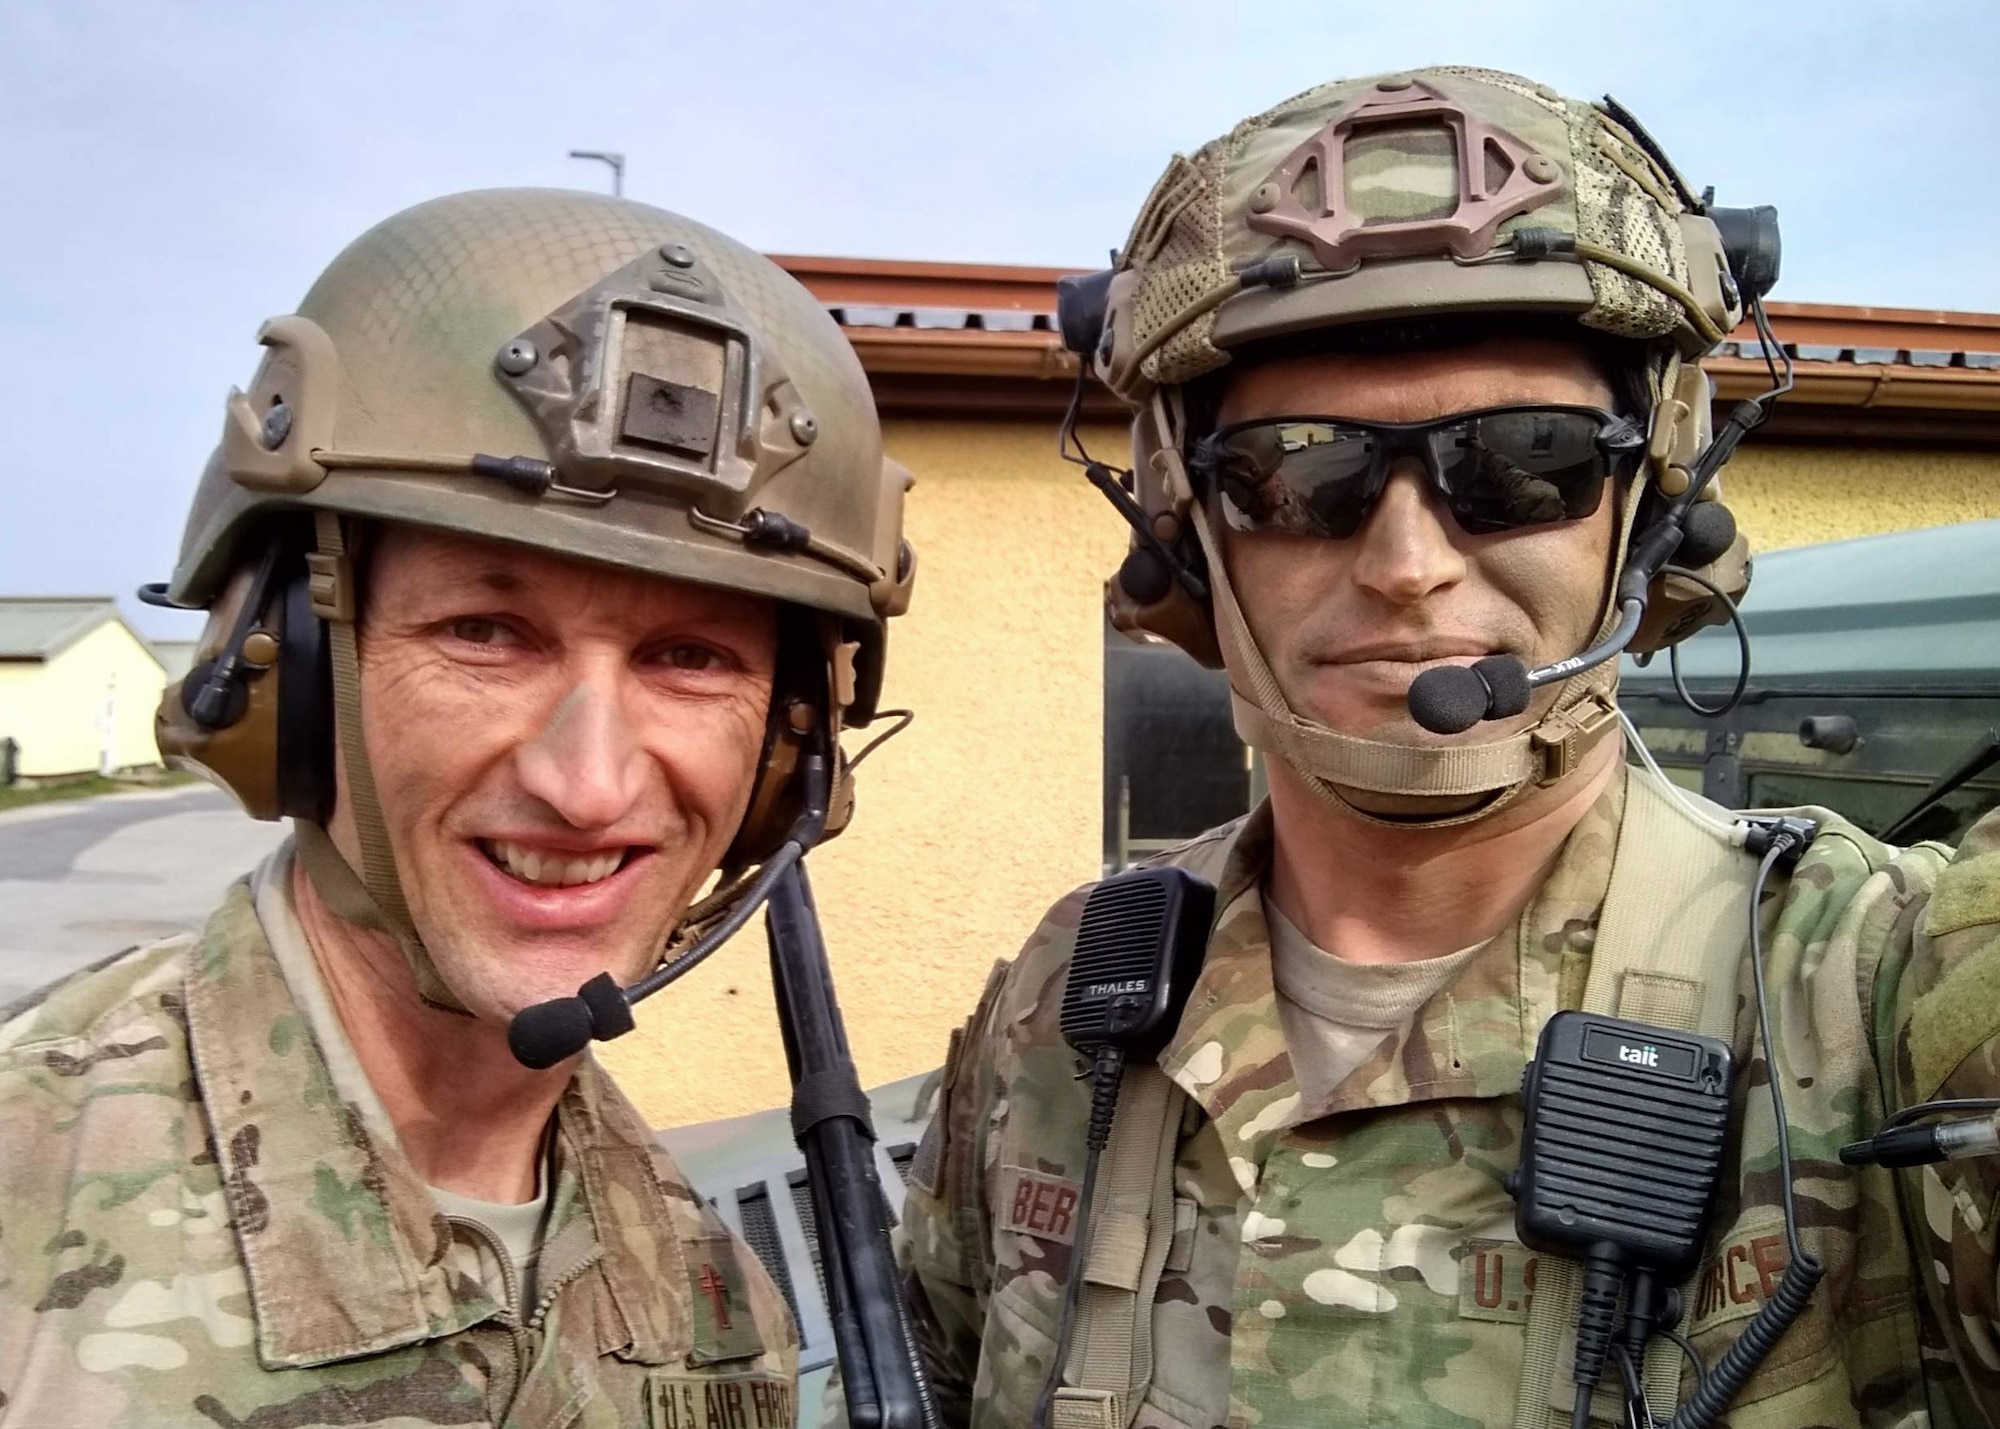 U.S. Air Force Chaplain (Maj.) Mark Hunsinger, 435th Air Expeditionary Wing and 435th Air Ground Operations Wing chaplain, poses for a photo with a Tactical Air Control Party Airman. Hunsinger earned the 2019 Military Chaplains Association Distinguished Service Award, which is presented to one chaplain from each branch of service every year for exemplifying the highest standards of the military and the Chaplain Corps (Courtesy Photo)